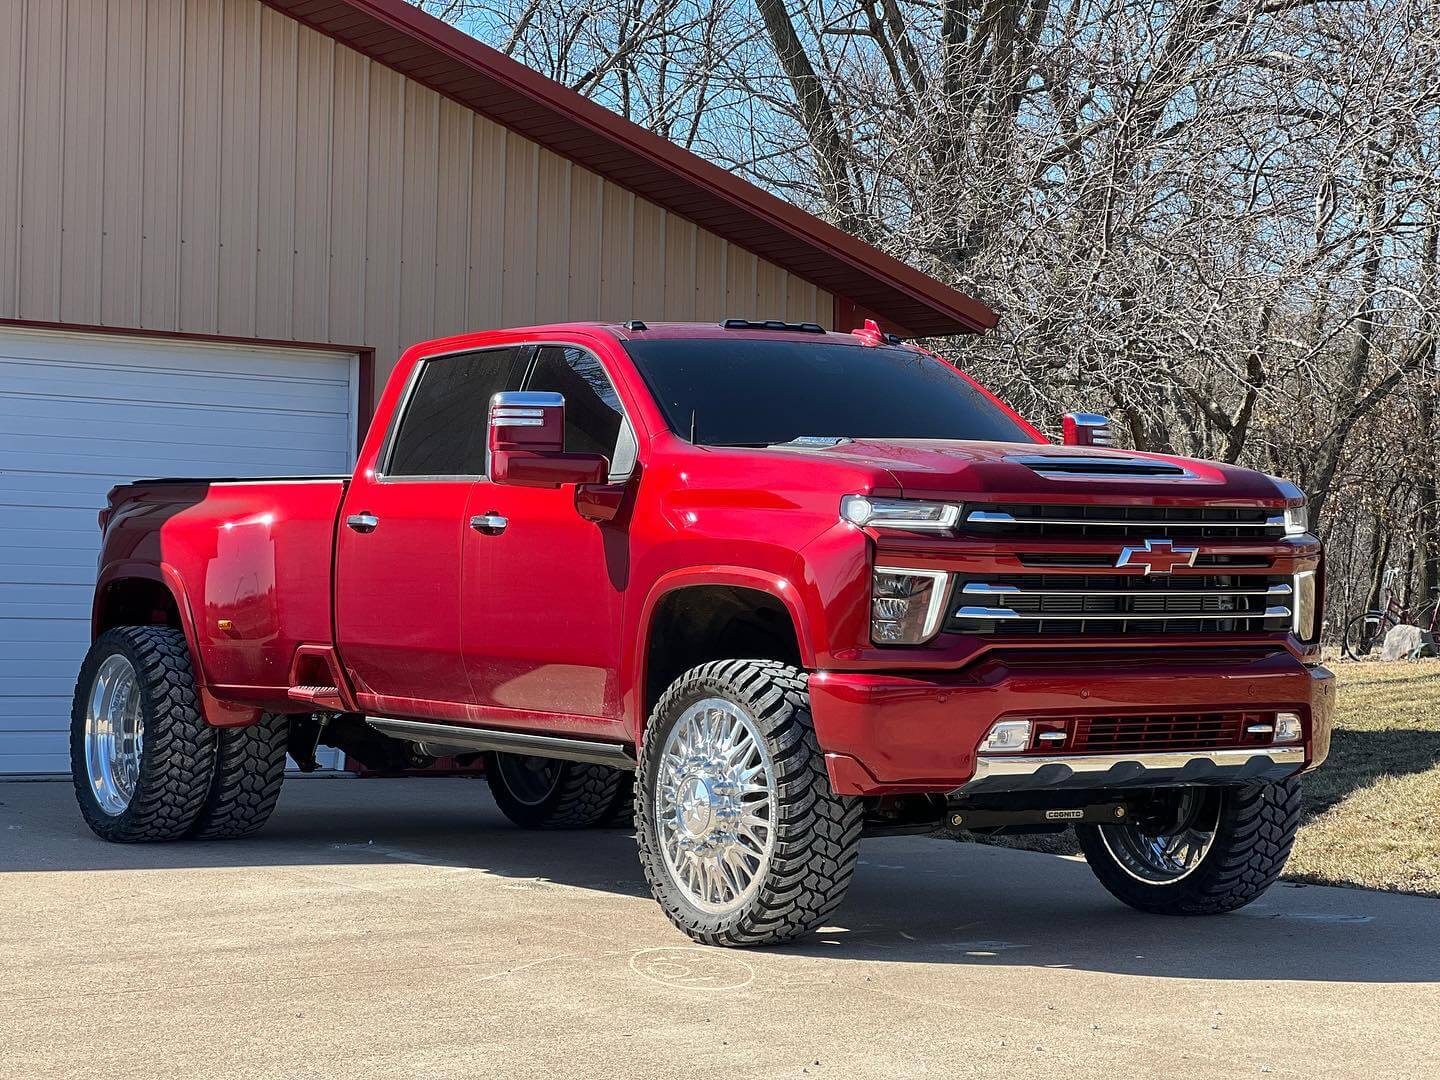 Red truck with new wheels